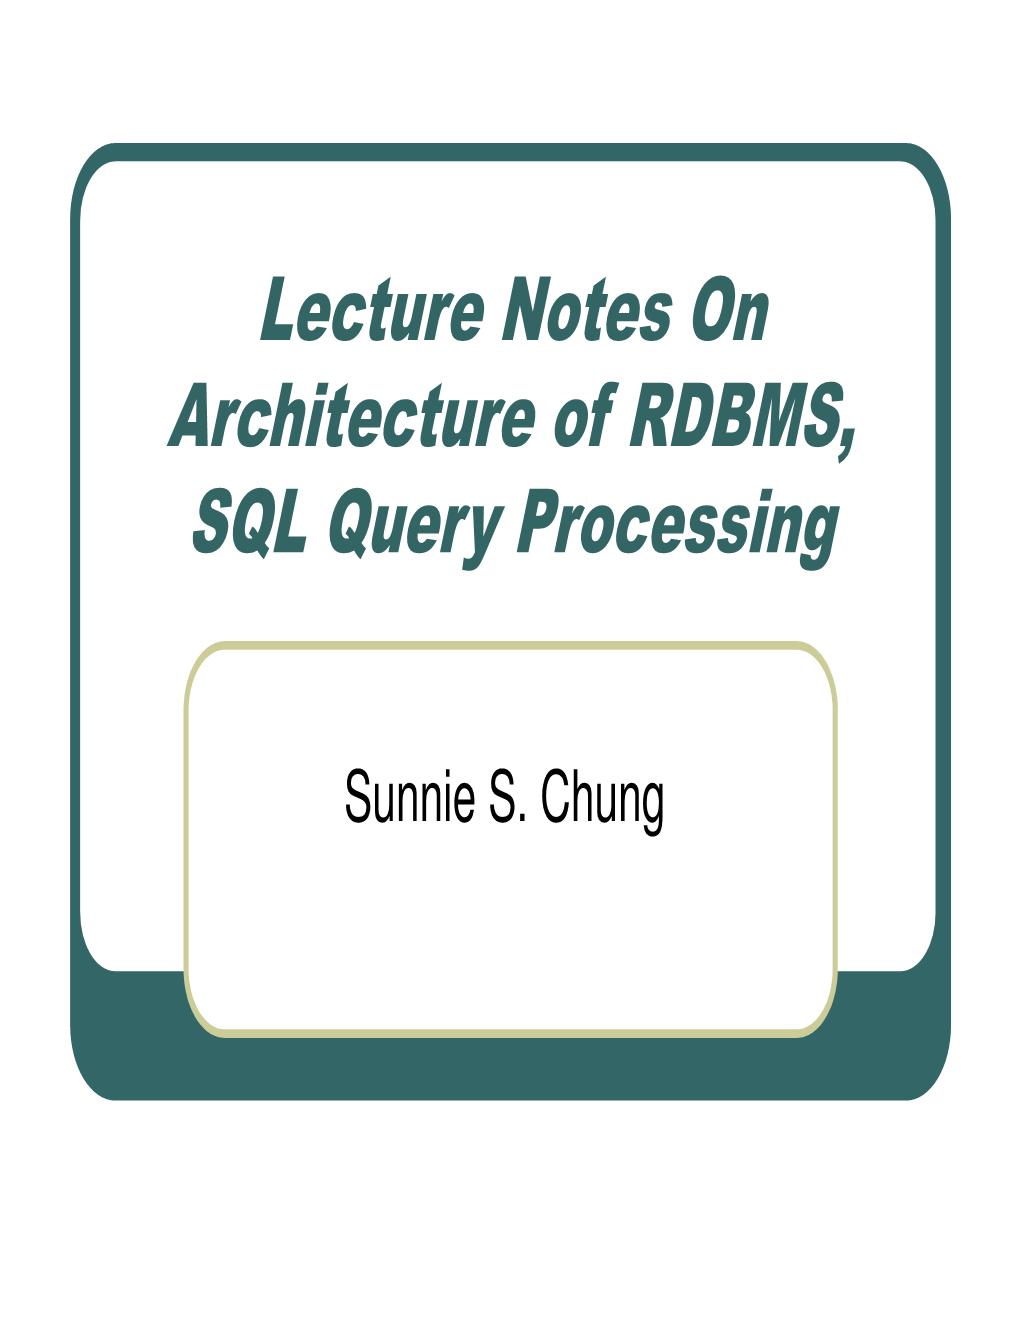 Lecture Notes on Architecture of RDBMS, SQL Query Processing